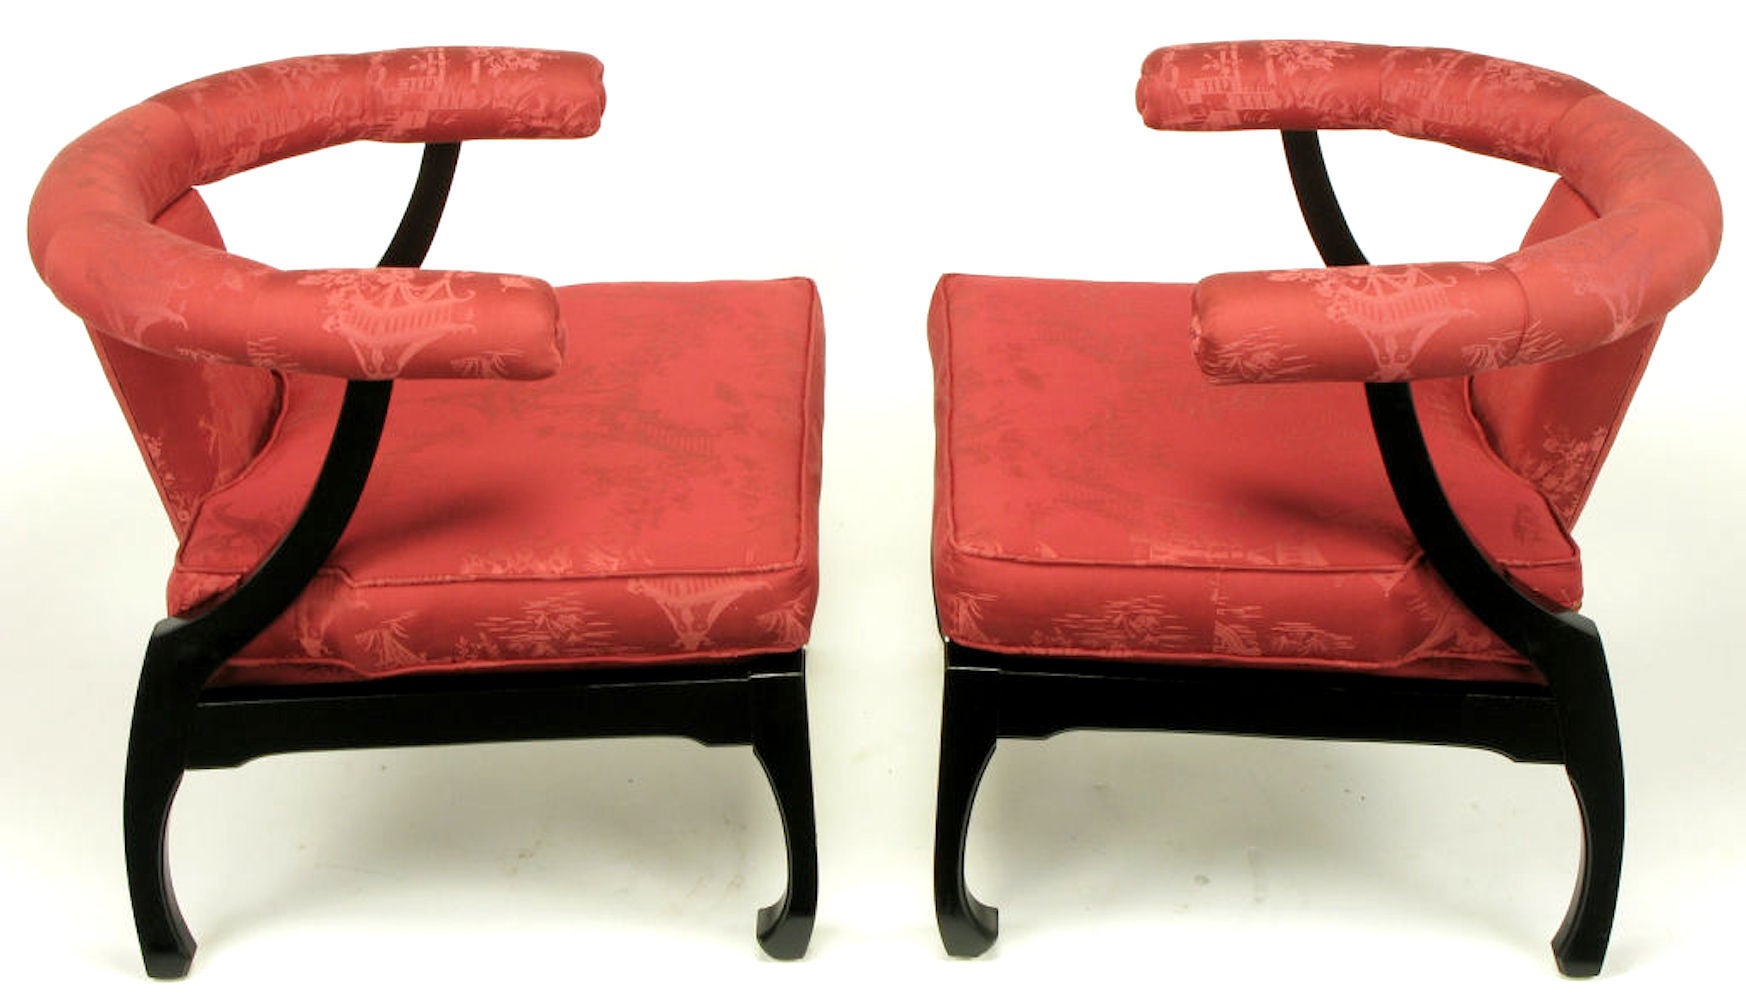 Pair of Black Lacquer Ming Style Silk Upholstered Chinese Lounge Chairs